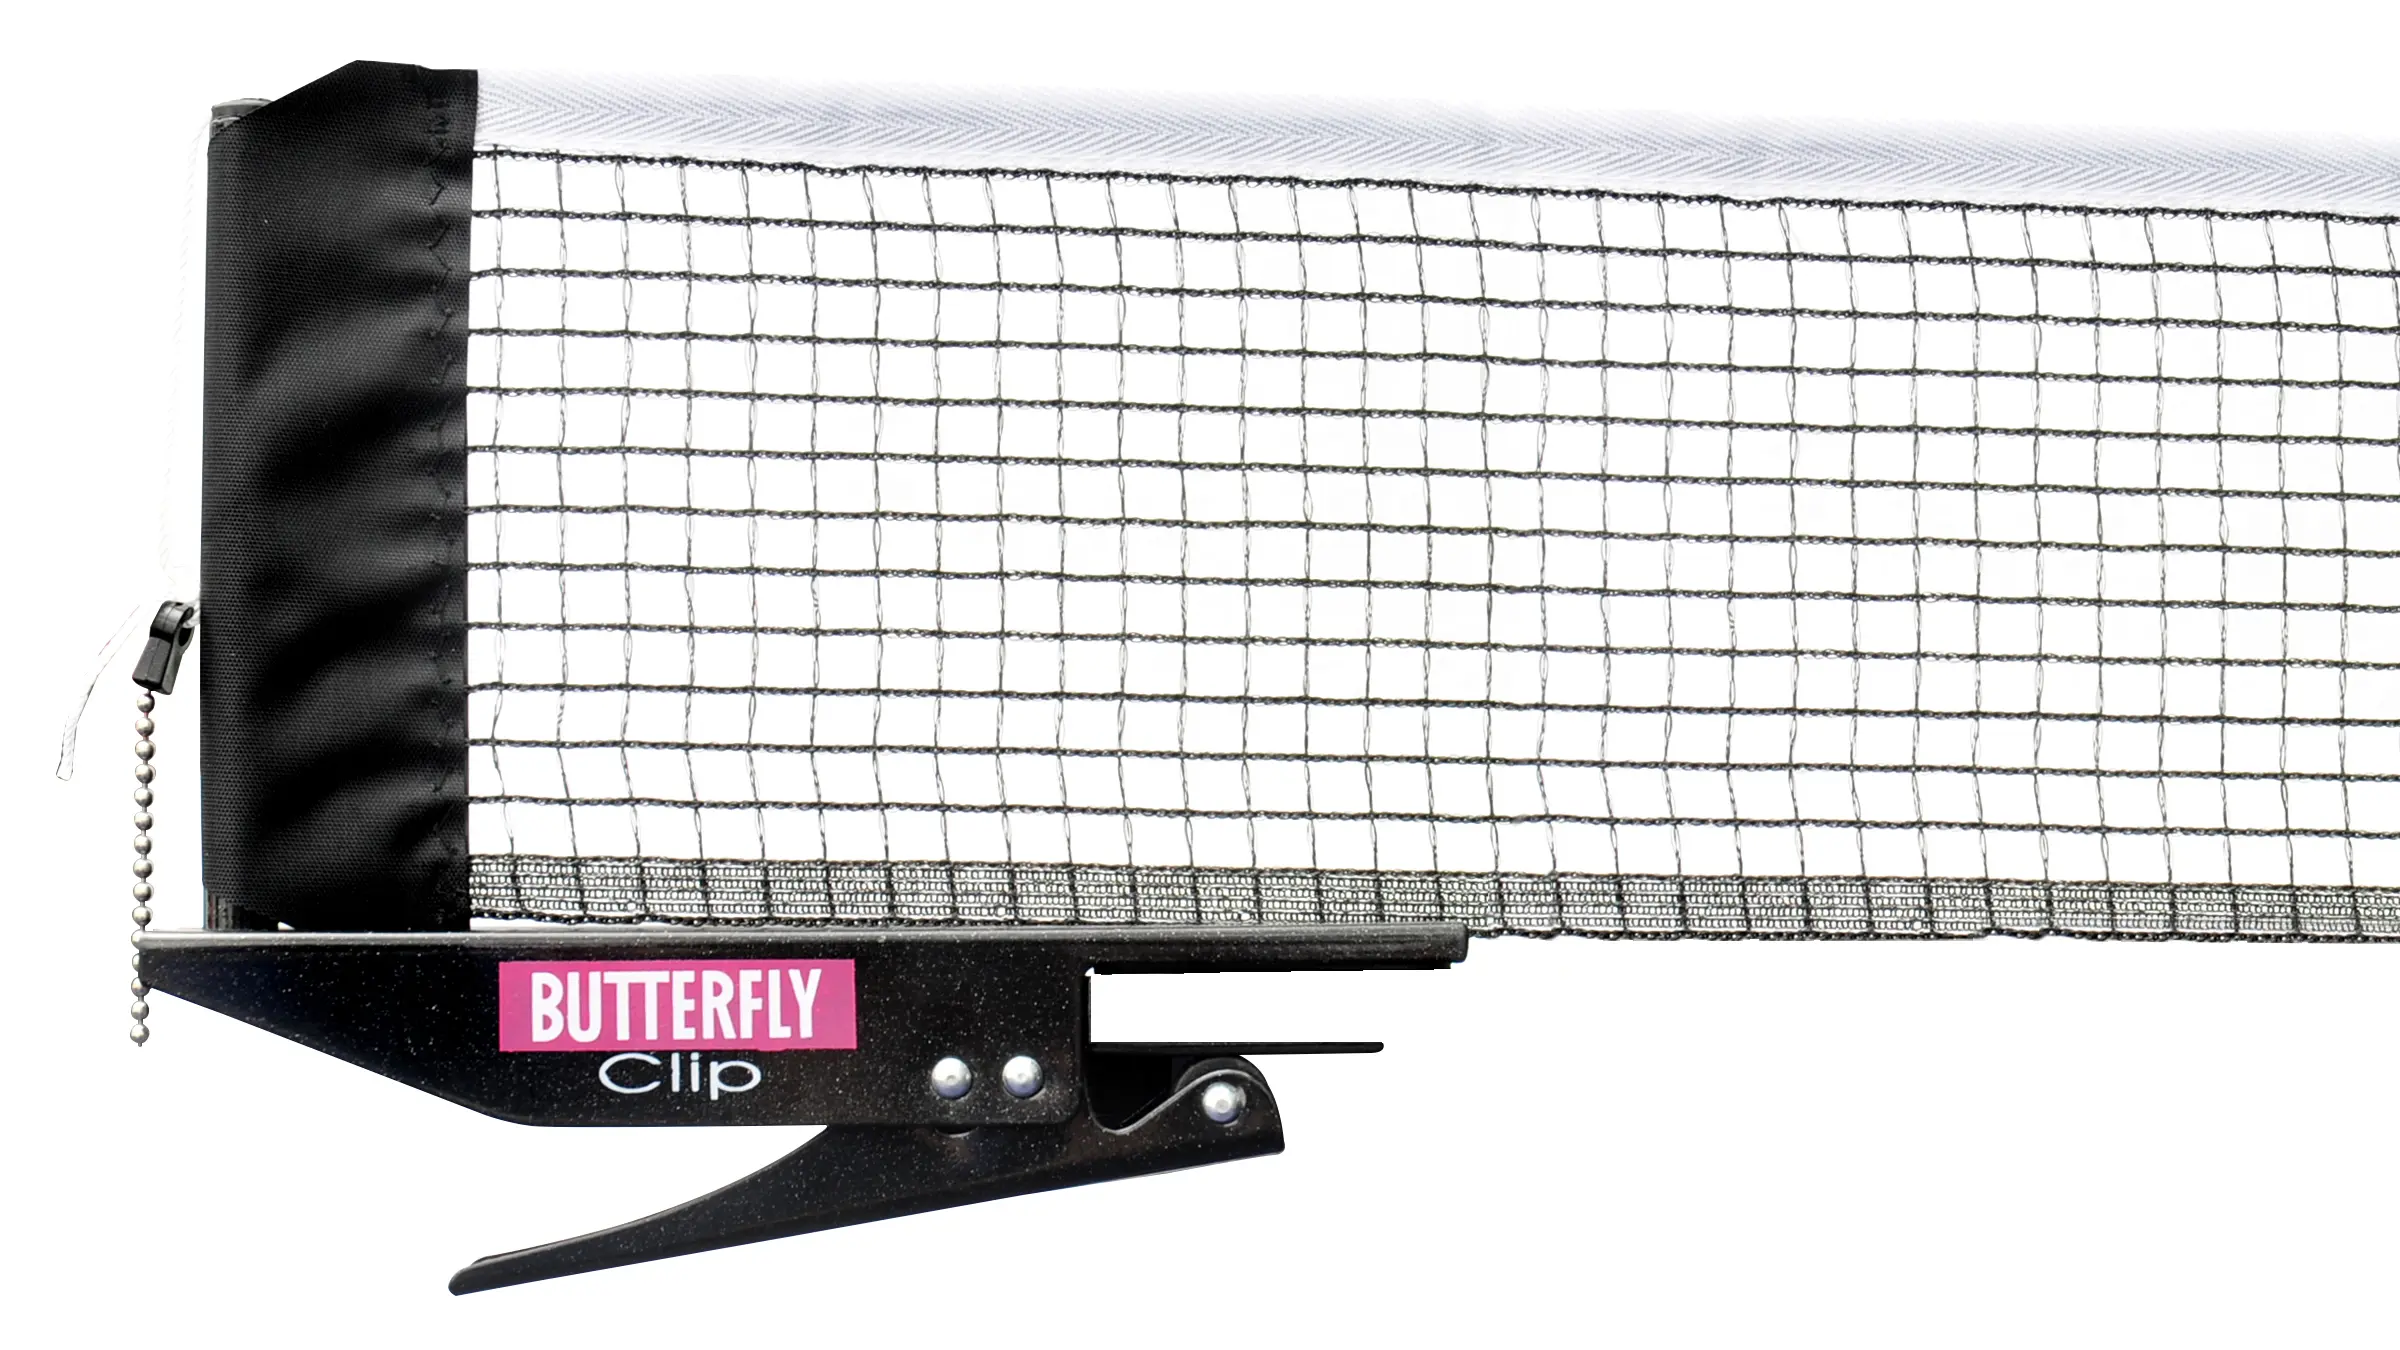 Butterfly Garden 6000 Blue Outdoor Rollaway Table Tennis Table image thumbnail